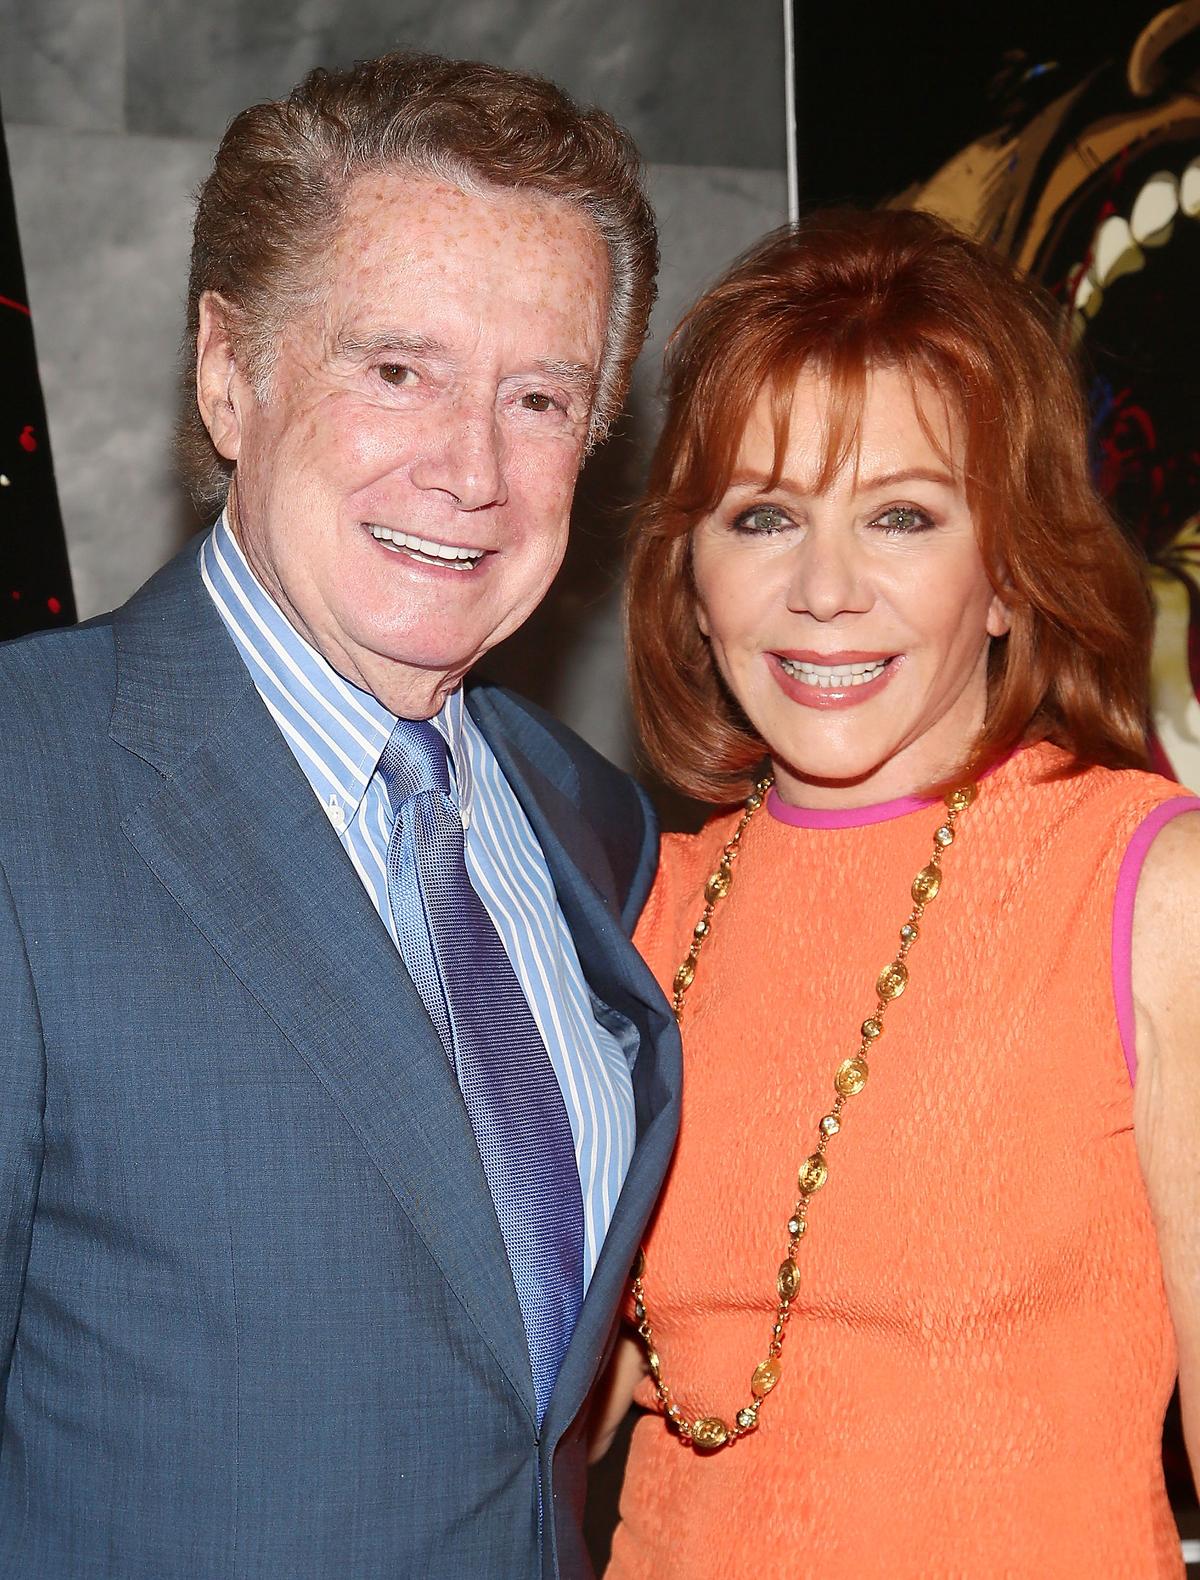 (L-R) Regis Philbin and Joy Philbin attend "EVOCATEUR: The Morton Downey Jr. Movie" New York Premiere at Paley Center For Media on June 5, 2013, in New York City. (©Getty Images | <a href="https://www.gettyimages.com/detail/news-photo/regis-philbin-and-joy-philbin-attend-evocateur-the-morton-news-photo/169988327">Astrid Stawiarz</a>)